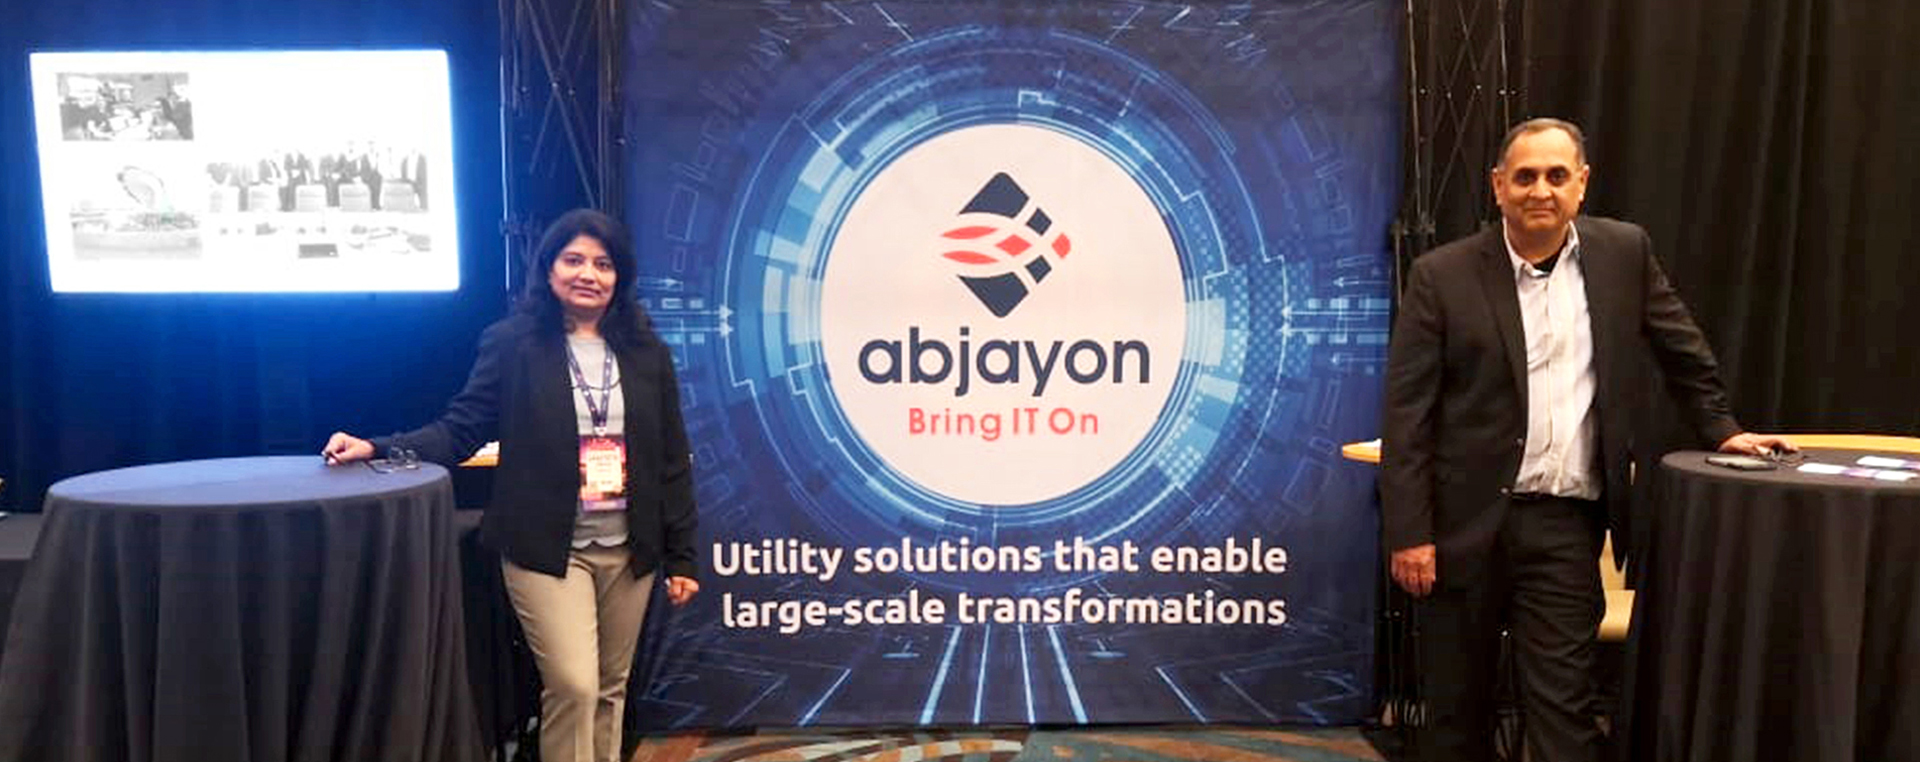 11th Oracle Utilities Users Group conference (OUUG2020) Abjayon